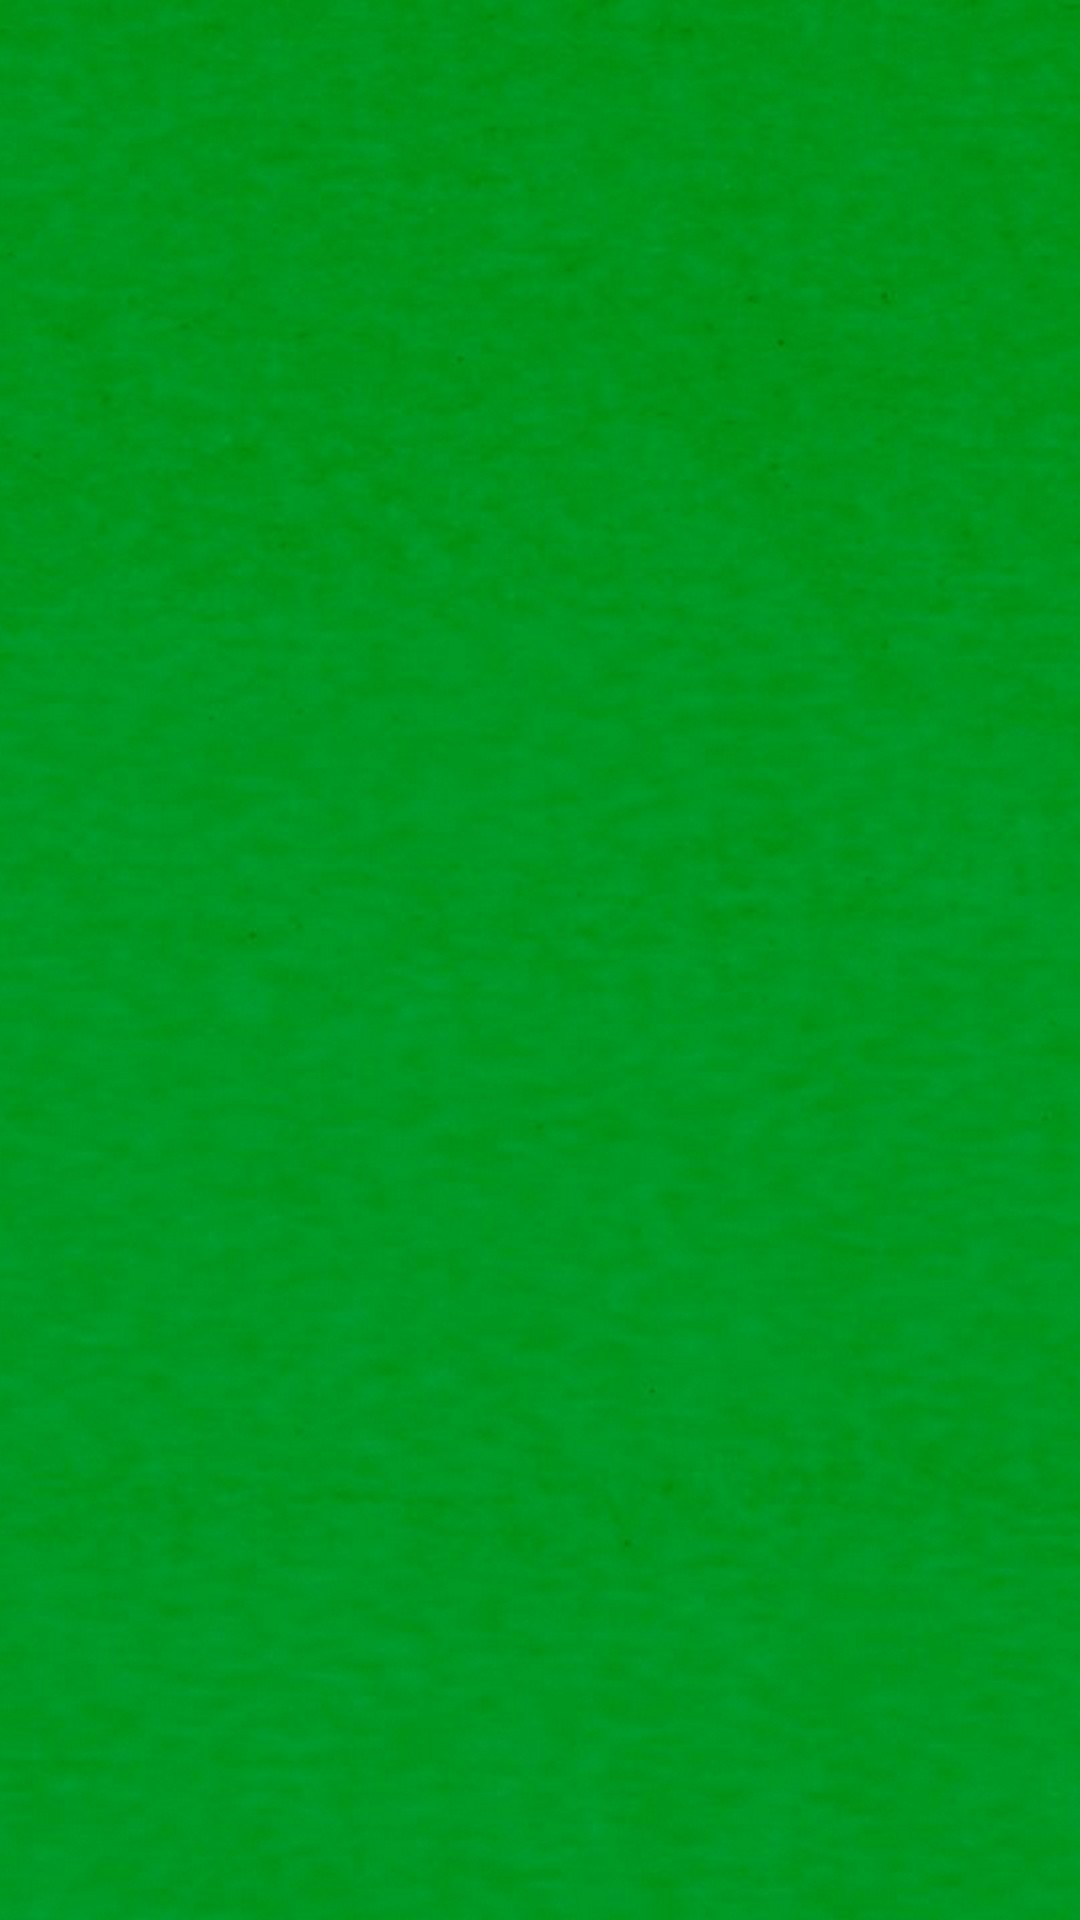 Wallpaper Green Android with image resolution 1080x1920 pixel. You can make this wallpaper for your Android backgrounds, Tablet, Smartphones Screensavers and Mobile Phone Lock Screen